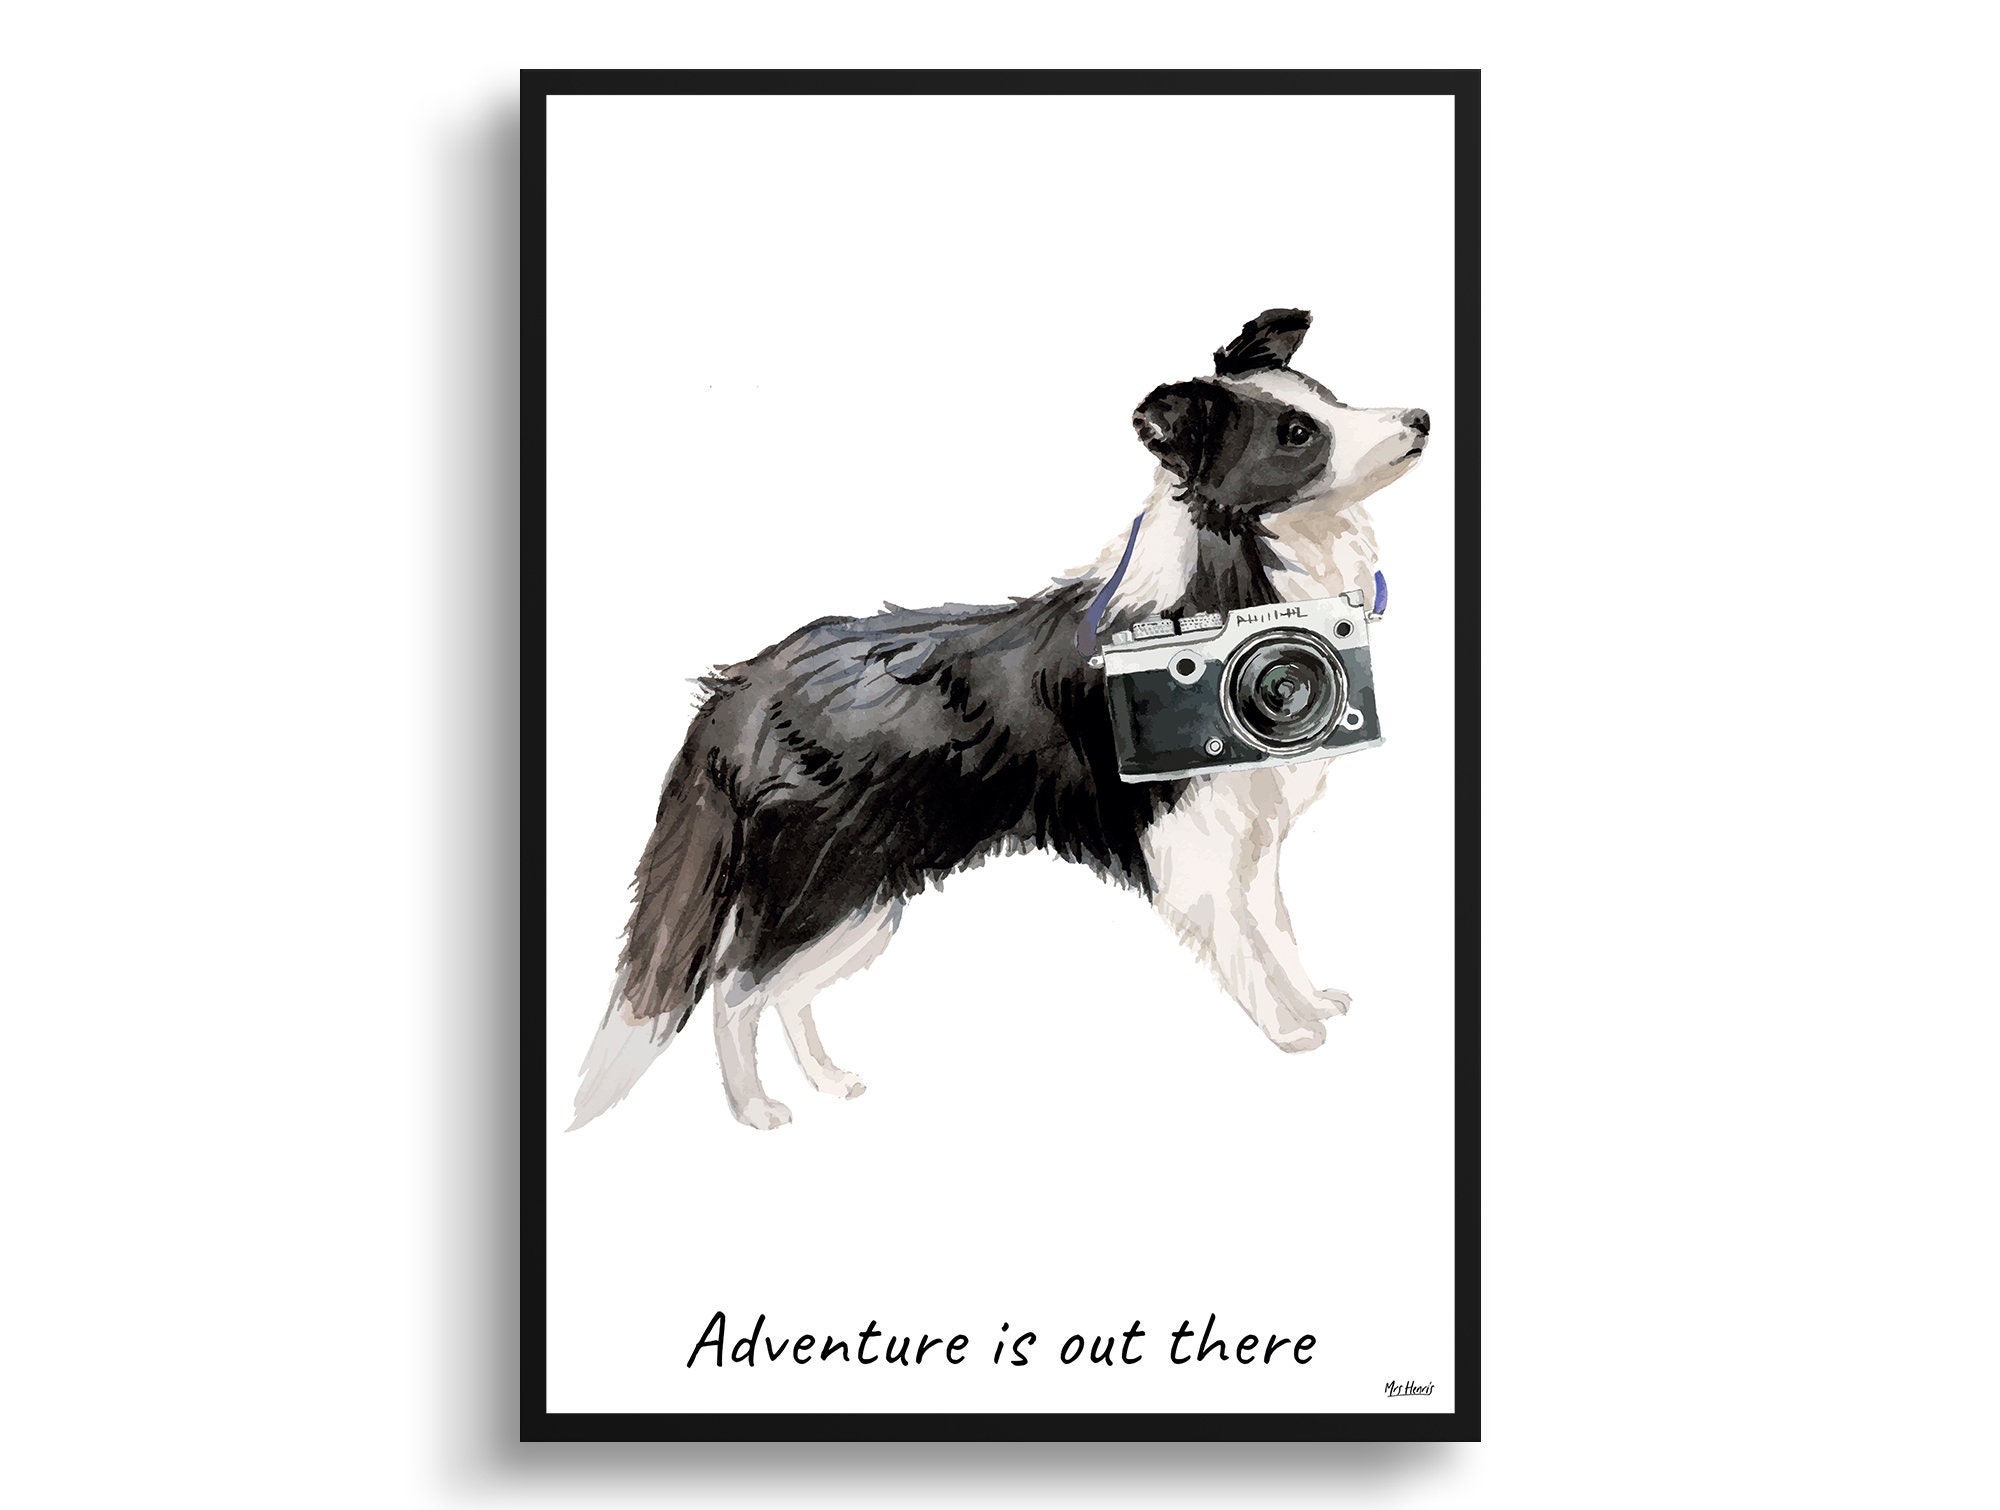 Adventure Is Out There Border Collie Dog Print Illustration. Framed & Un-Framed Wall Art Options. Personalised Name